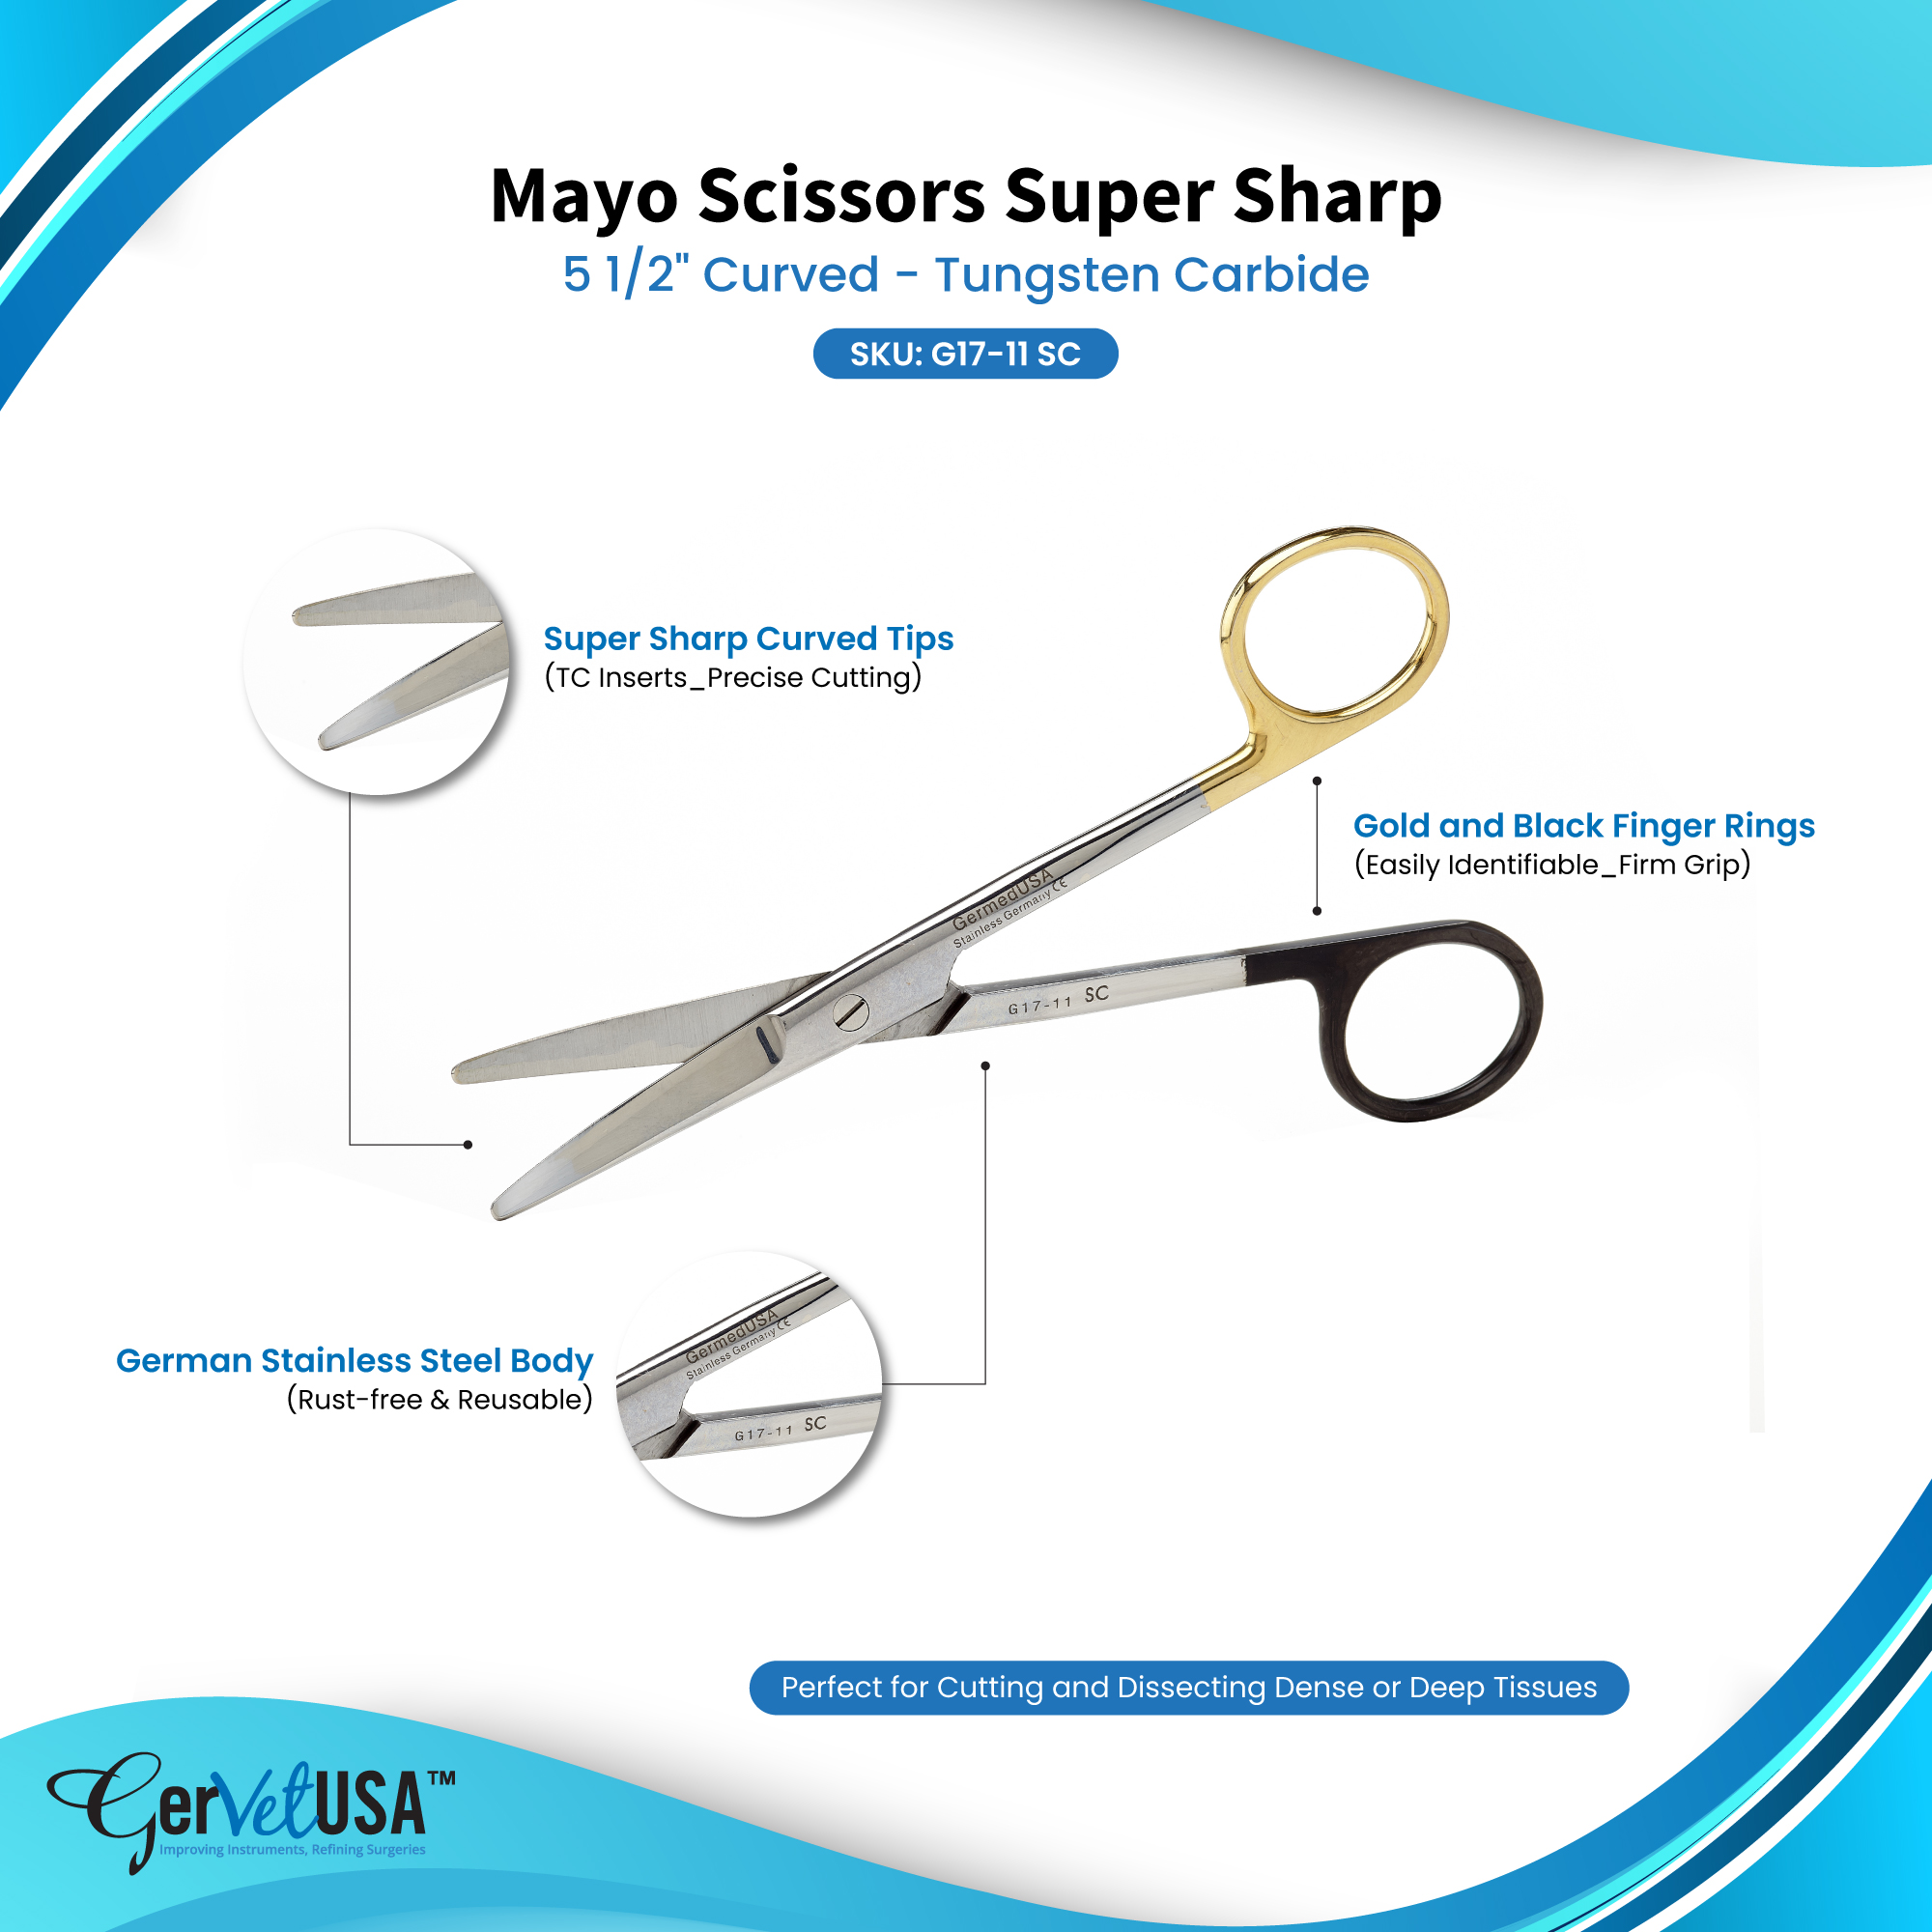 https://www.gervetusa.com/up_data/products/images/ssmds-super-sharp-mayo-dissecting-scissors-curved-tungsten-carbide-1654520816-.jpg